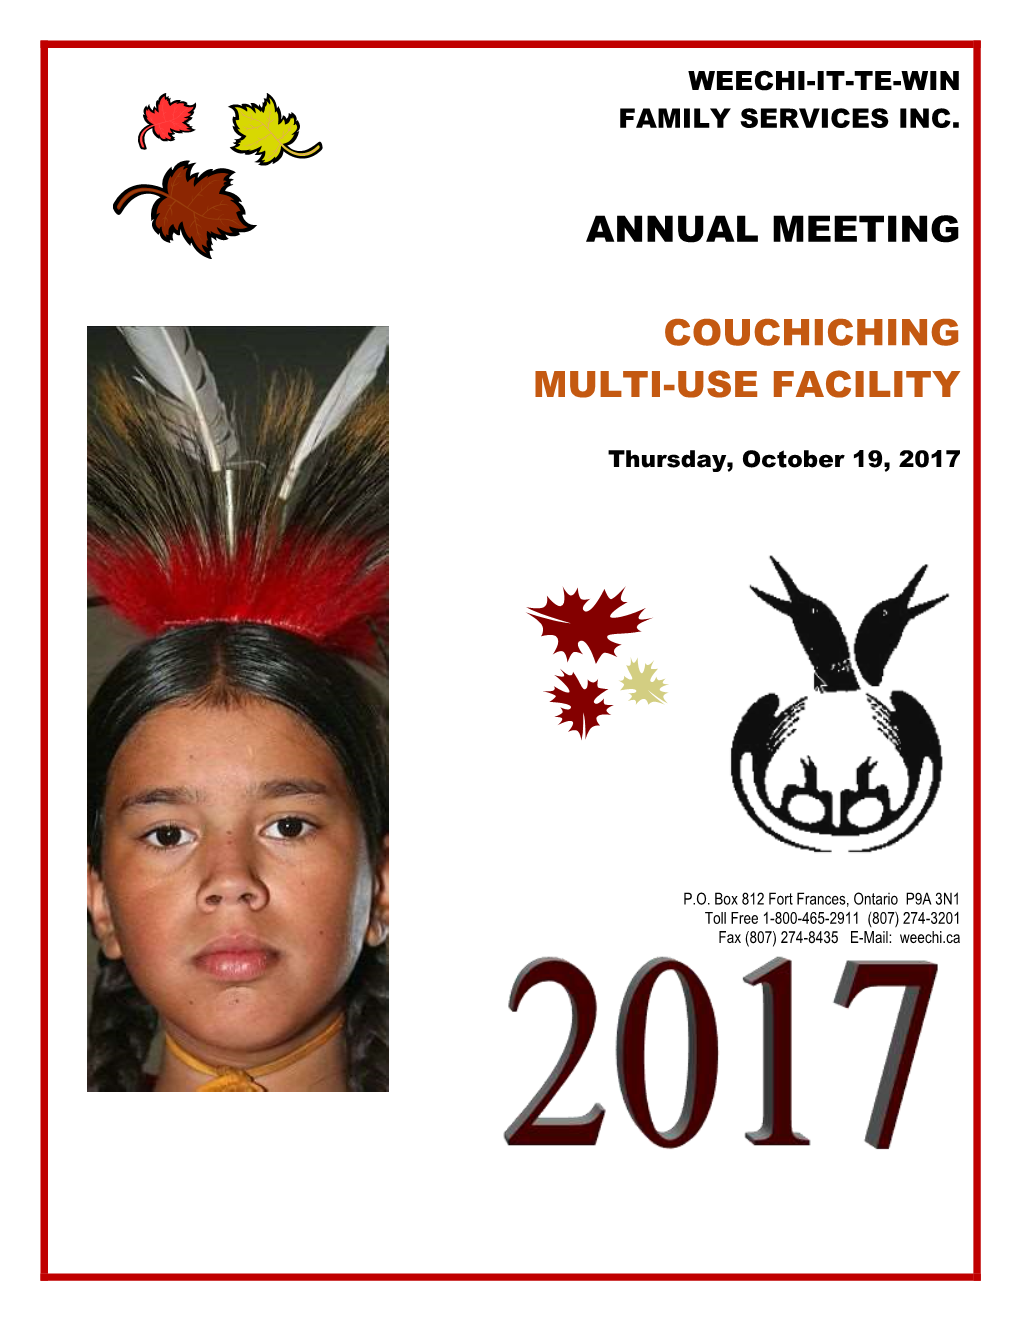 Annual Meeting Couchiching Multi-Use Facility